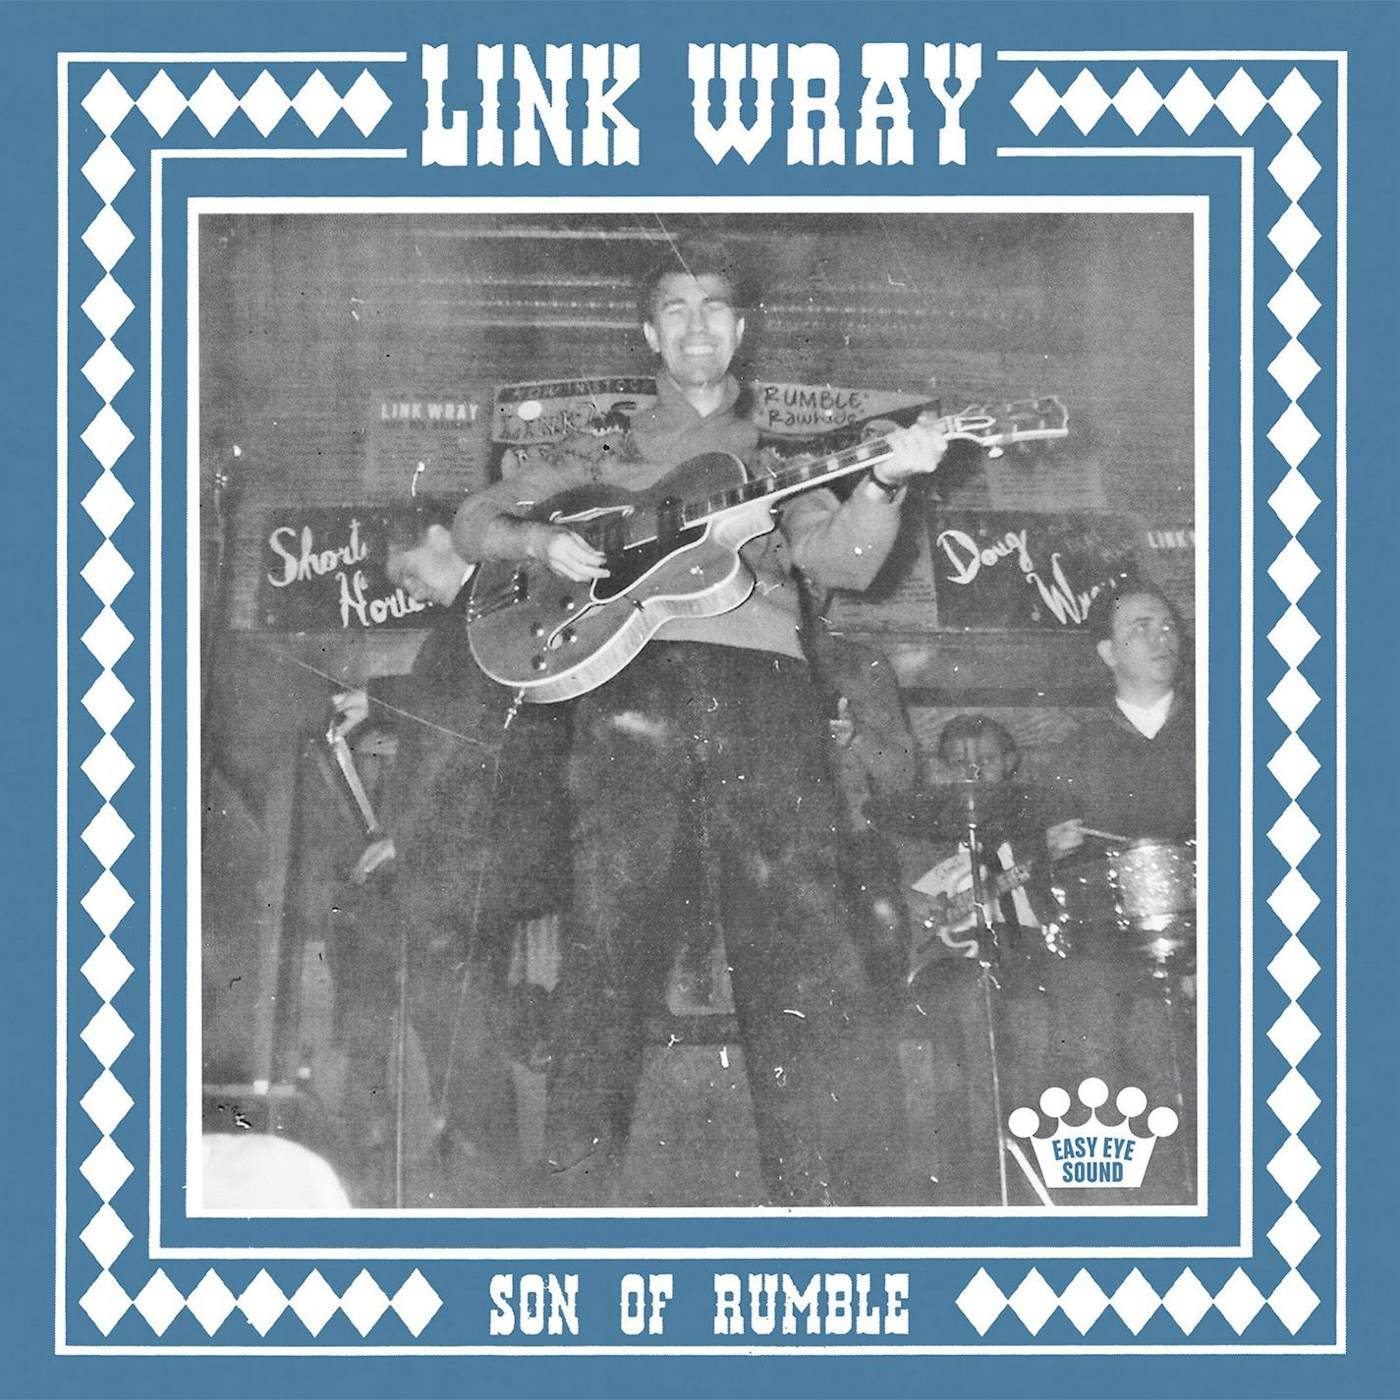 Link Wray Son of Rumble Vinyl Record